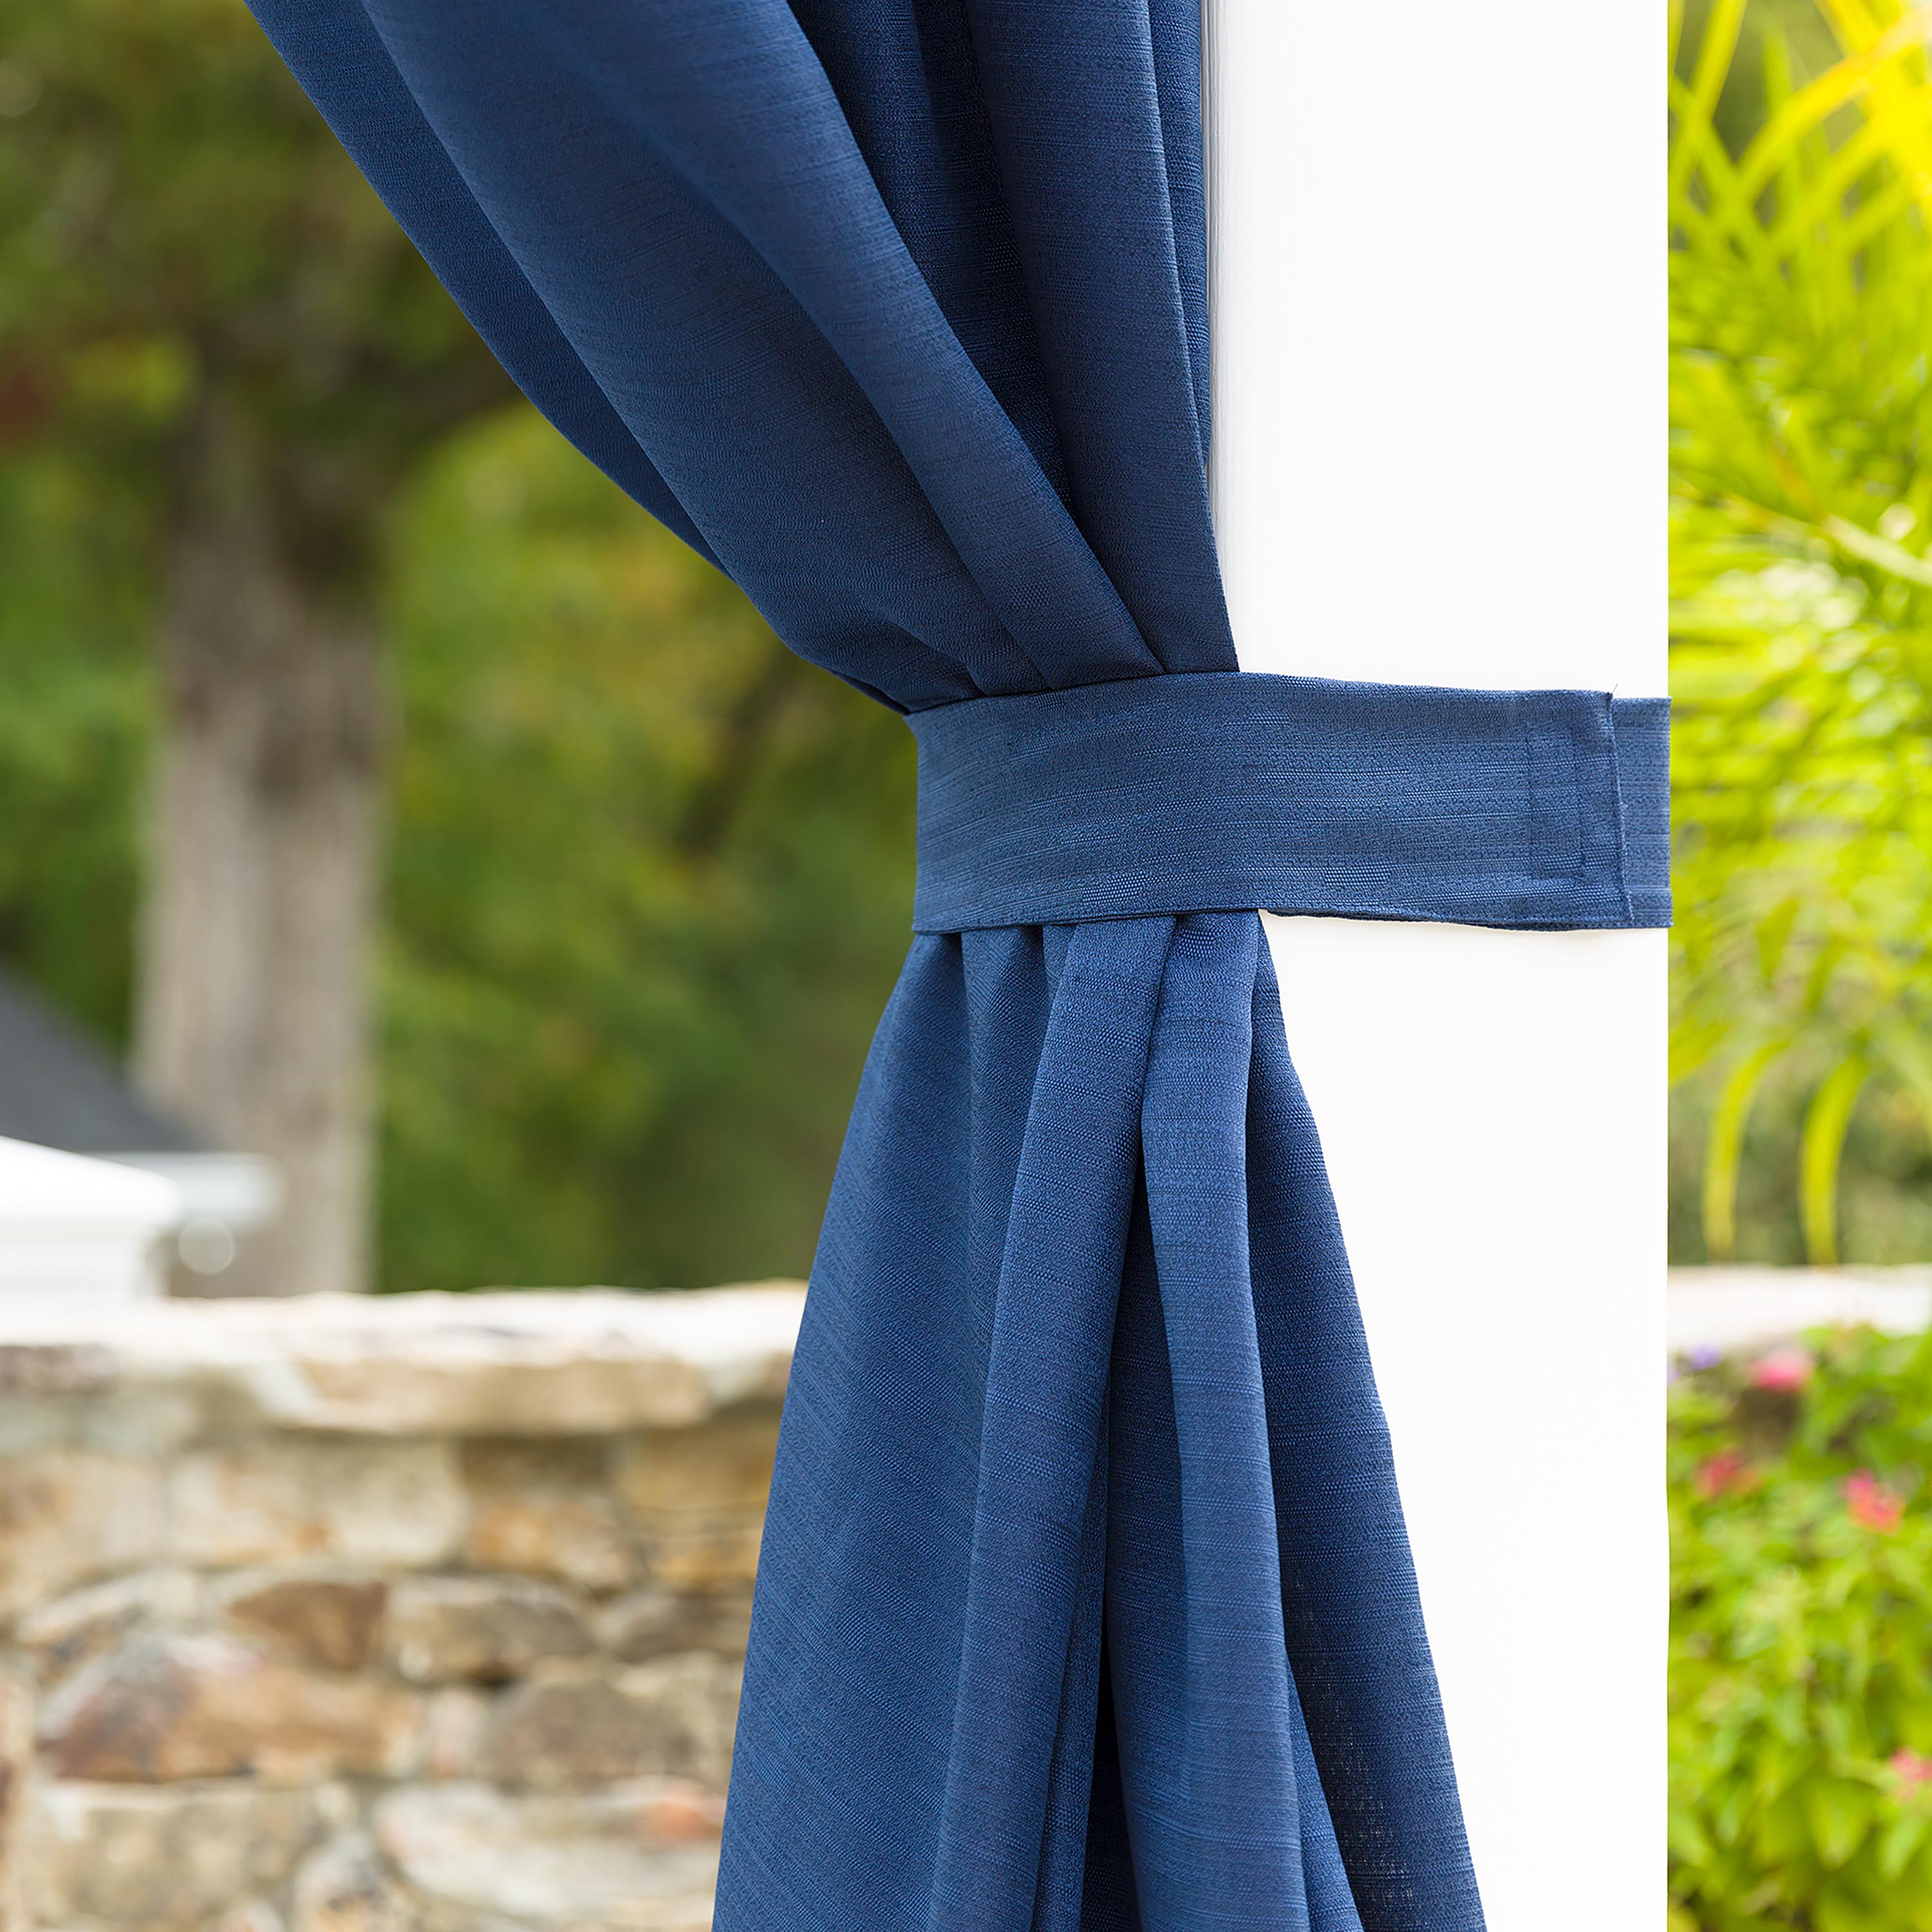 Grasscloth Outdoor Curtain Panel with Grommet Top, 110"W x 84"L